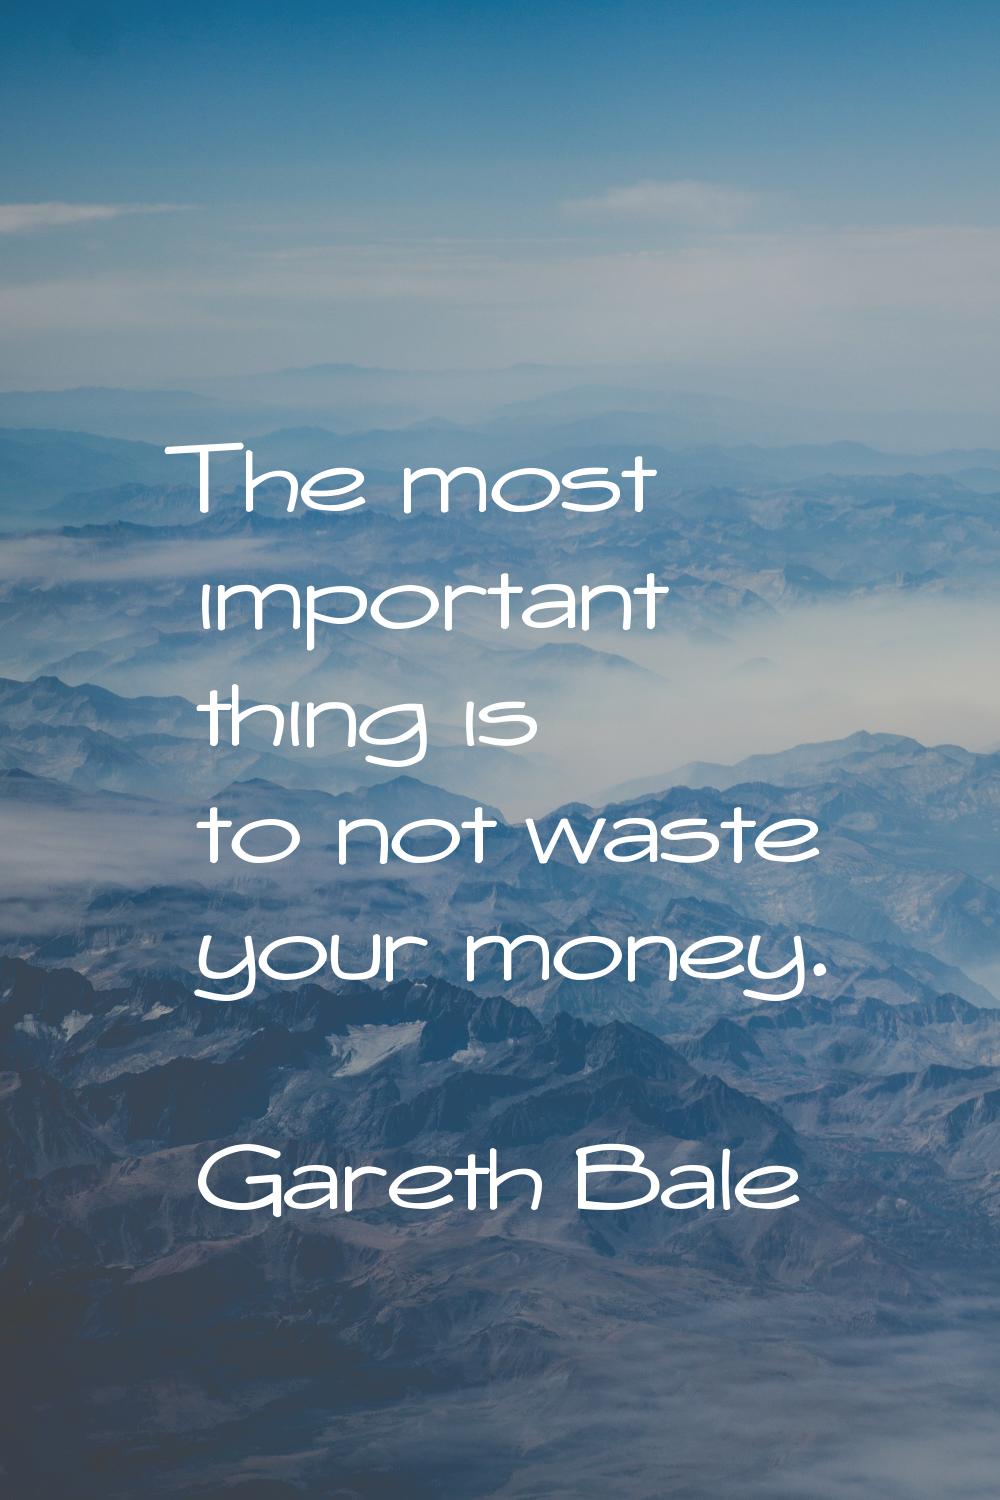 The most important thing is to not waste your money.